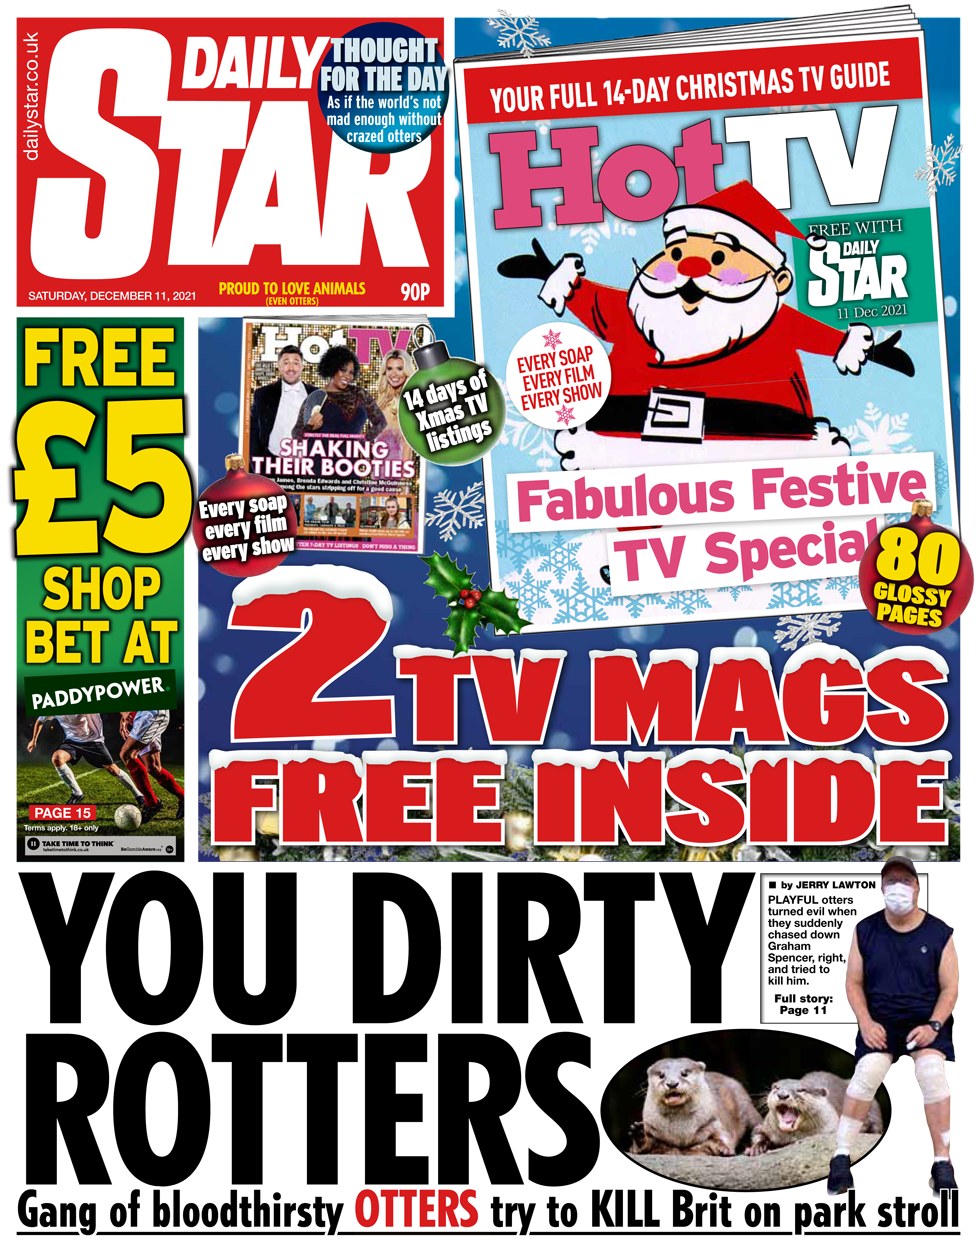 Front page of the Daily Star